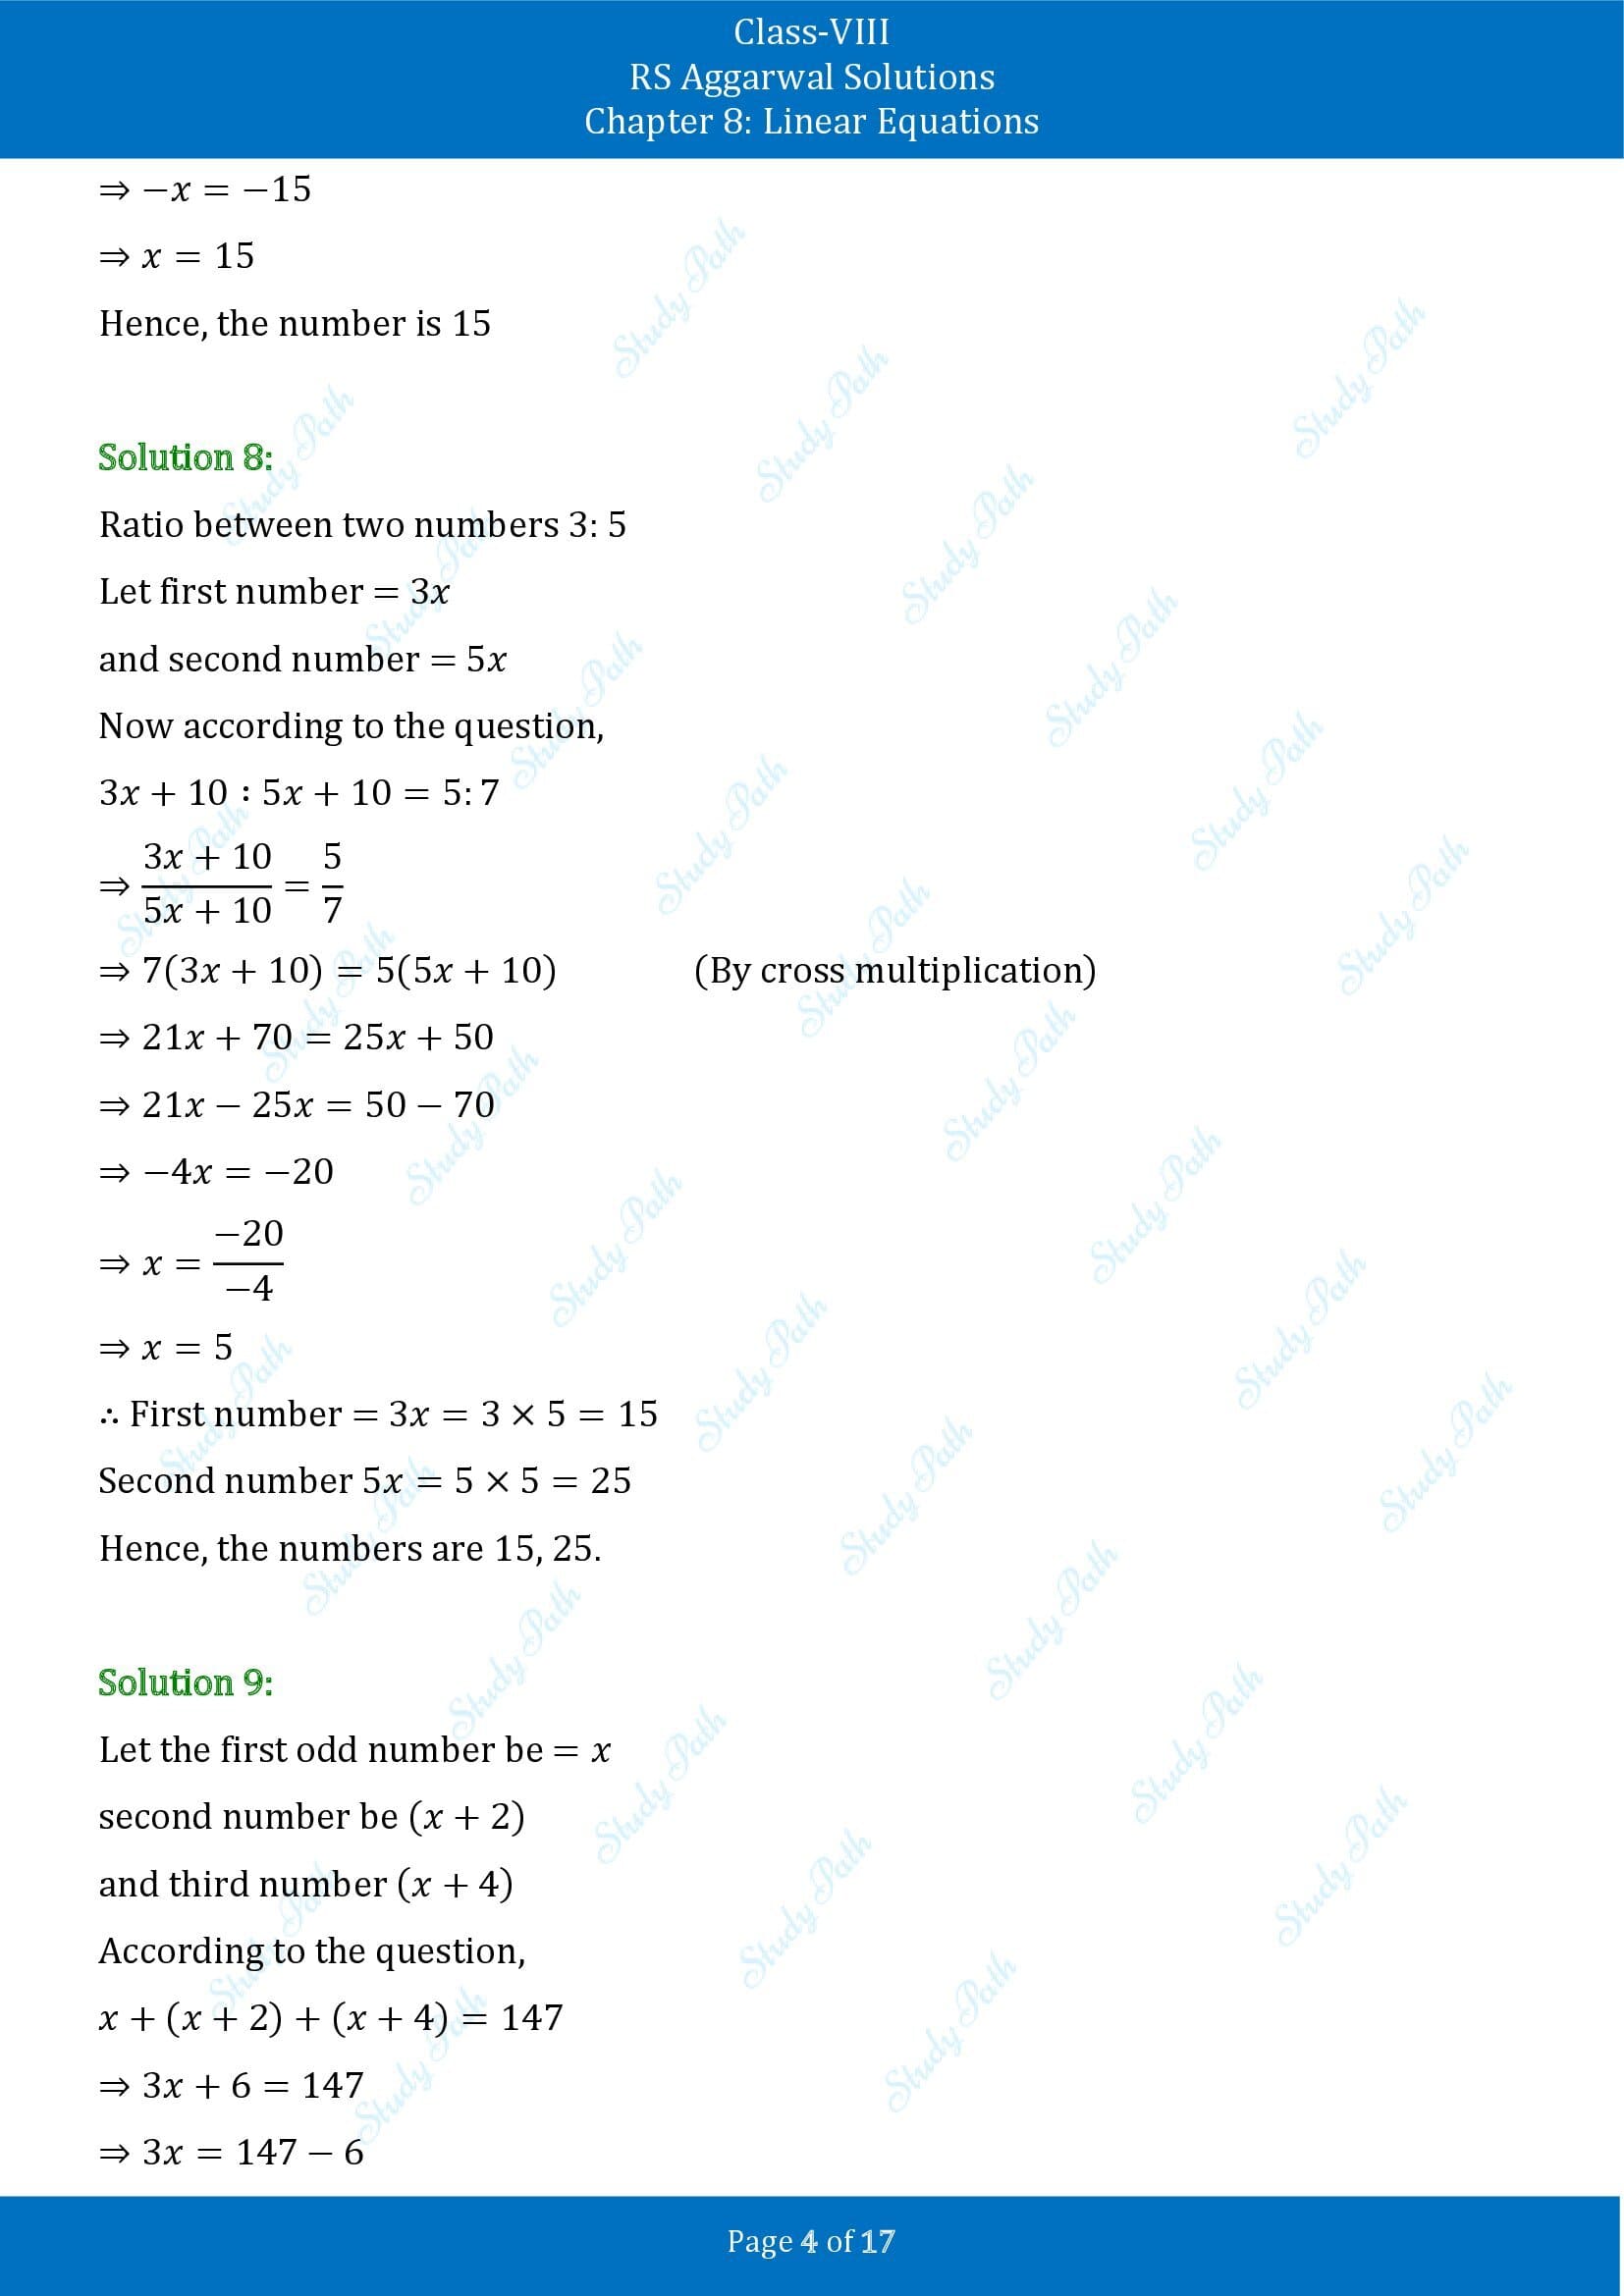 RS Aggarwal Solutions Class 8 Chapter 8 Linear Equations Exercise 8B 00004